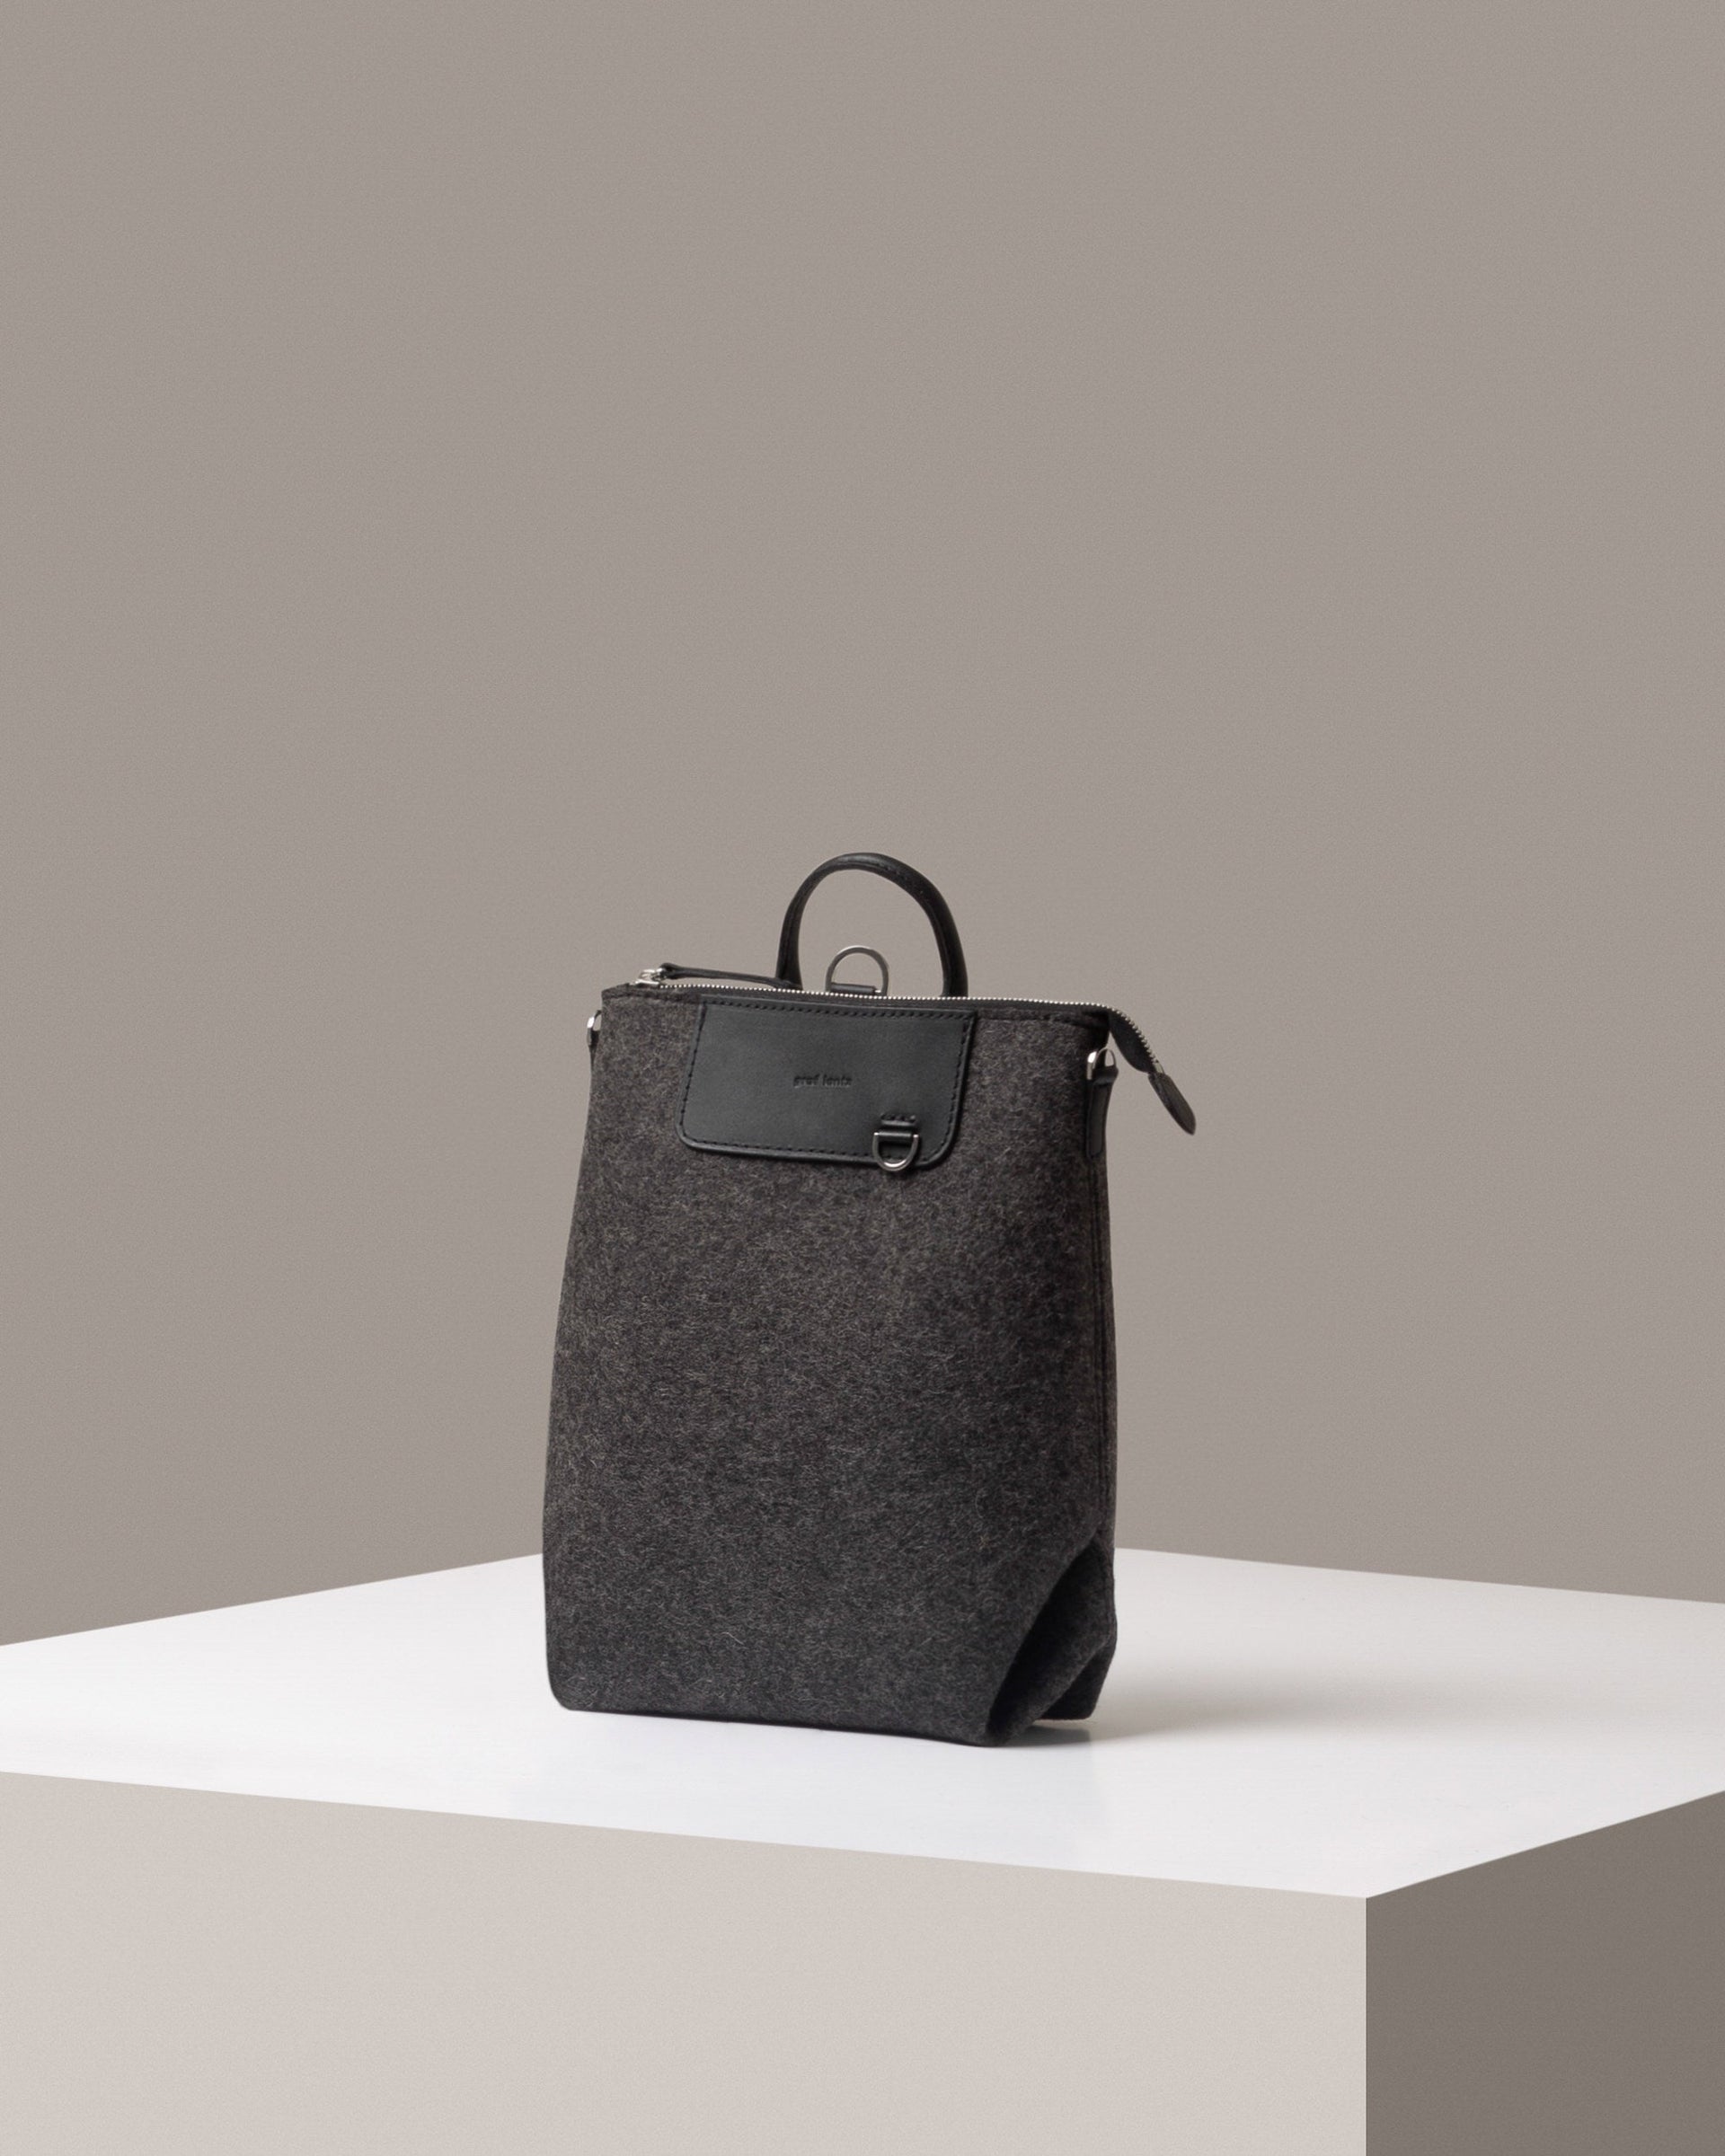 A Bedford Merino Wool Felt Midi Backpack in dark gray, displayed in a three-quarter view on a white base